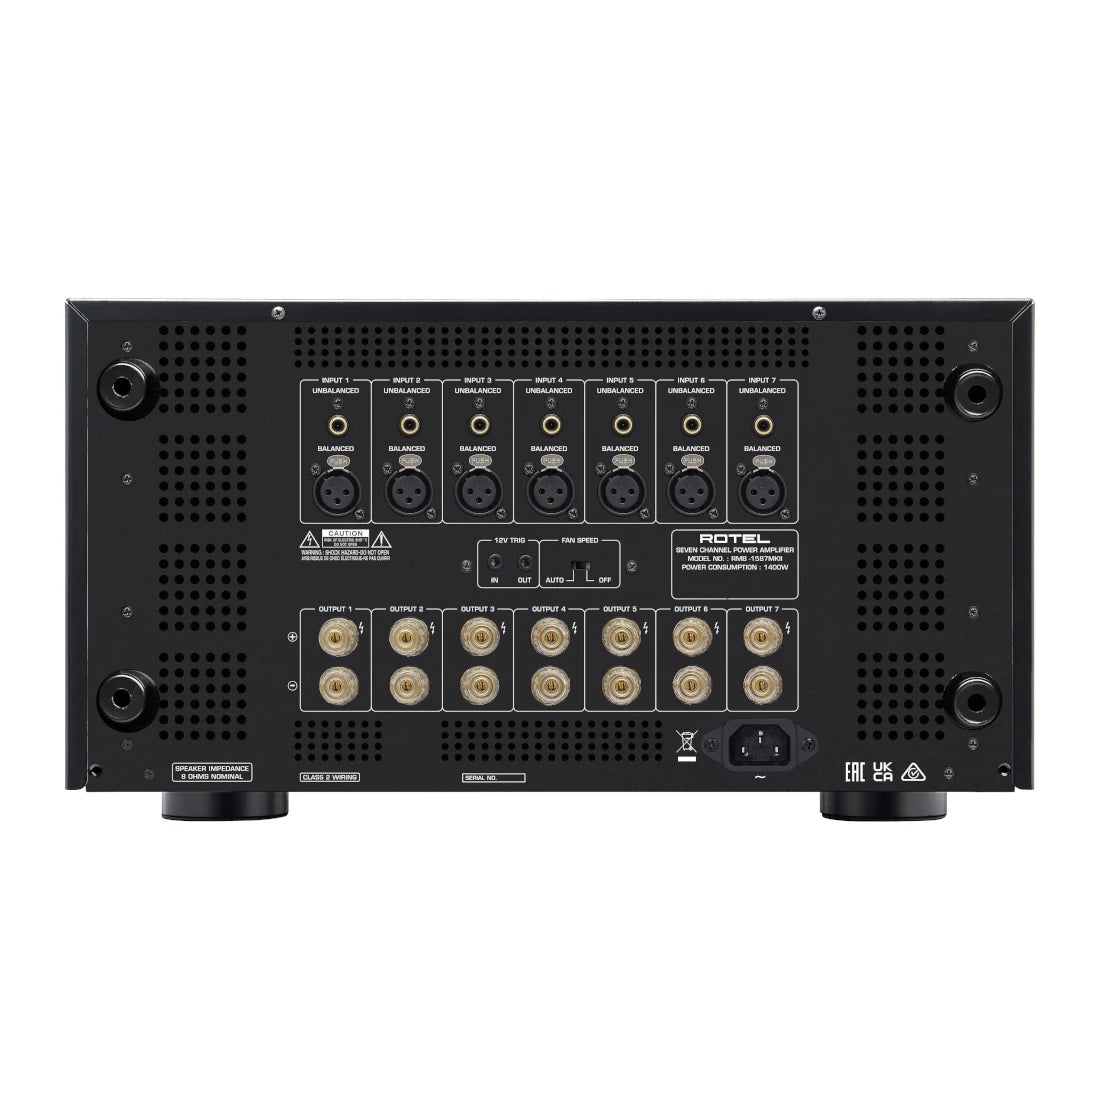 Rotel RMB-1587 MKII 7 channel Power Amplifier - Rear View